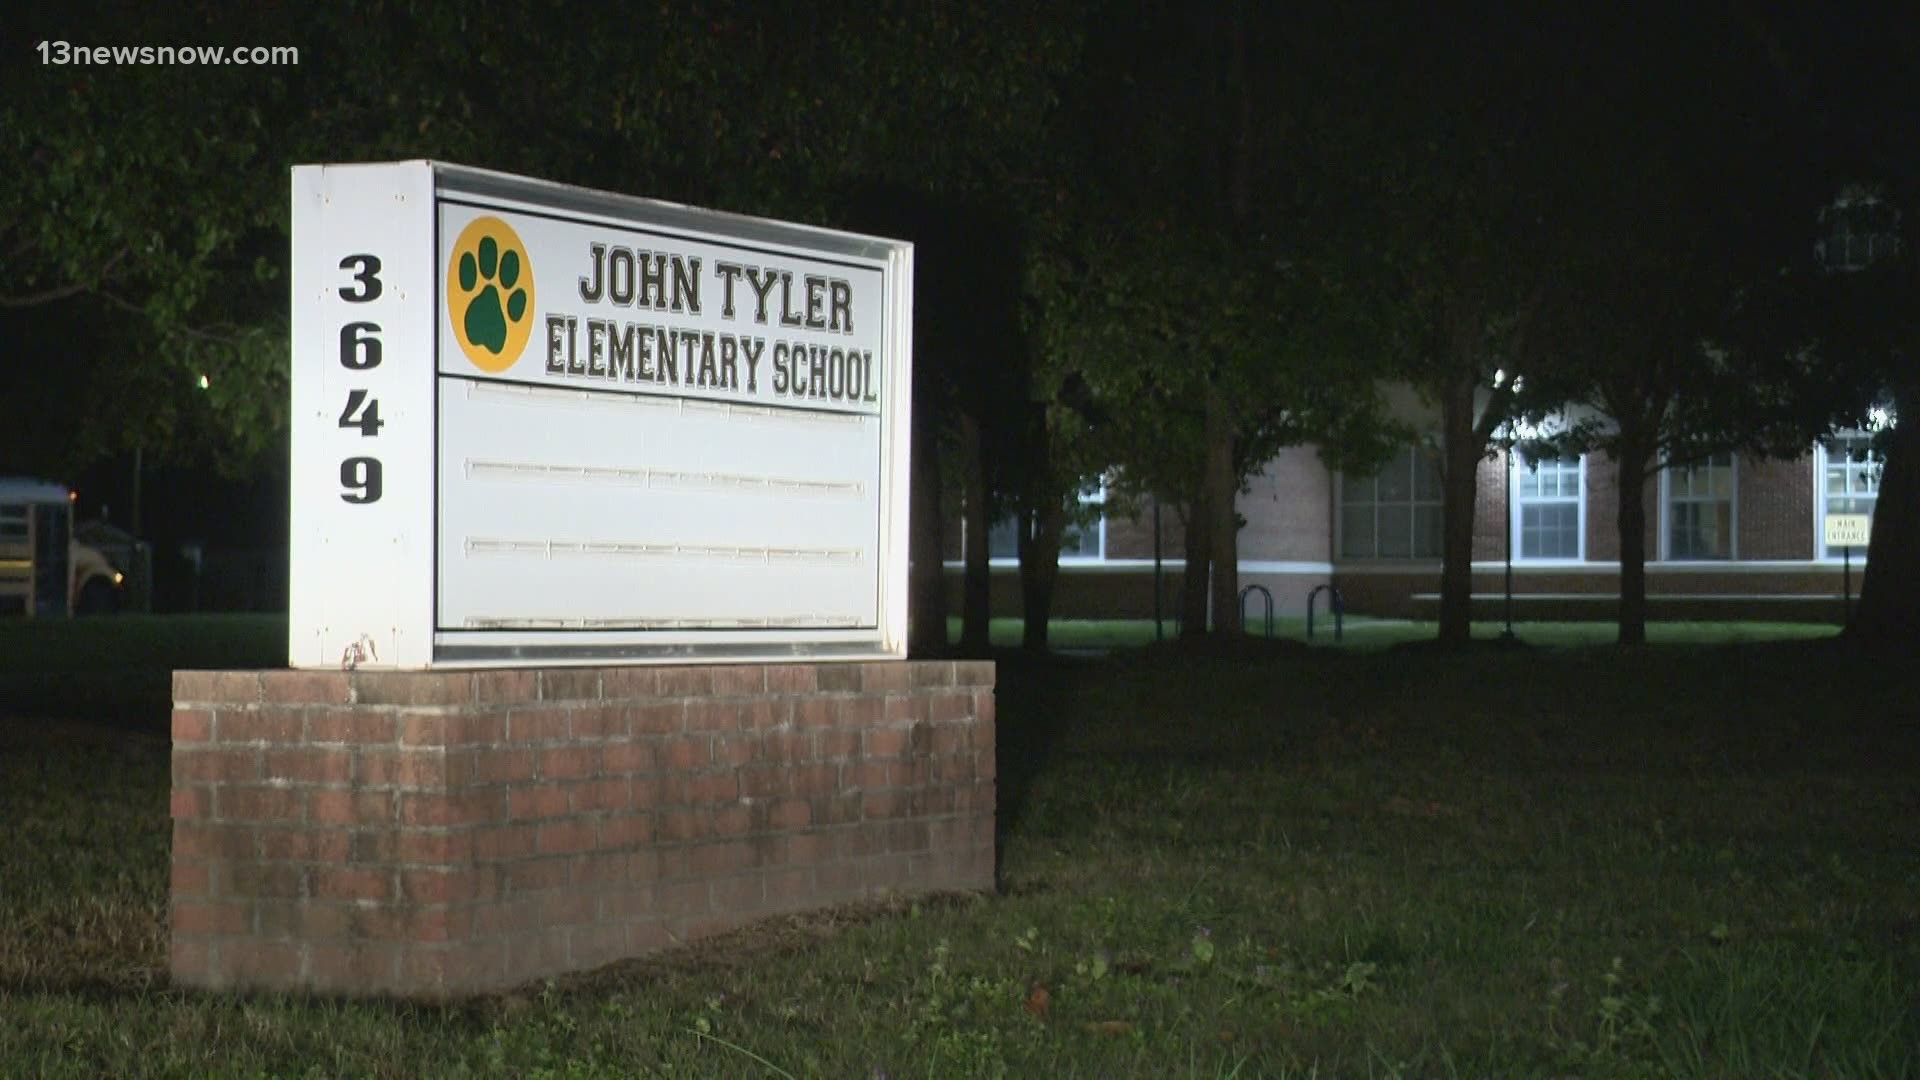 The school board voted to give new names for Woodrow Wilson High School as well as James Hurst and John Tyler Elementary Schools.